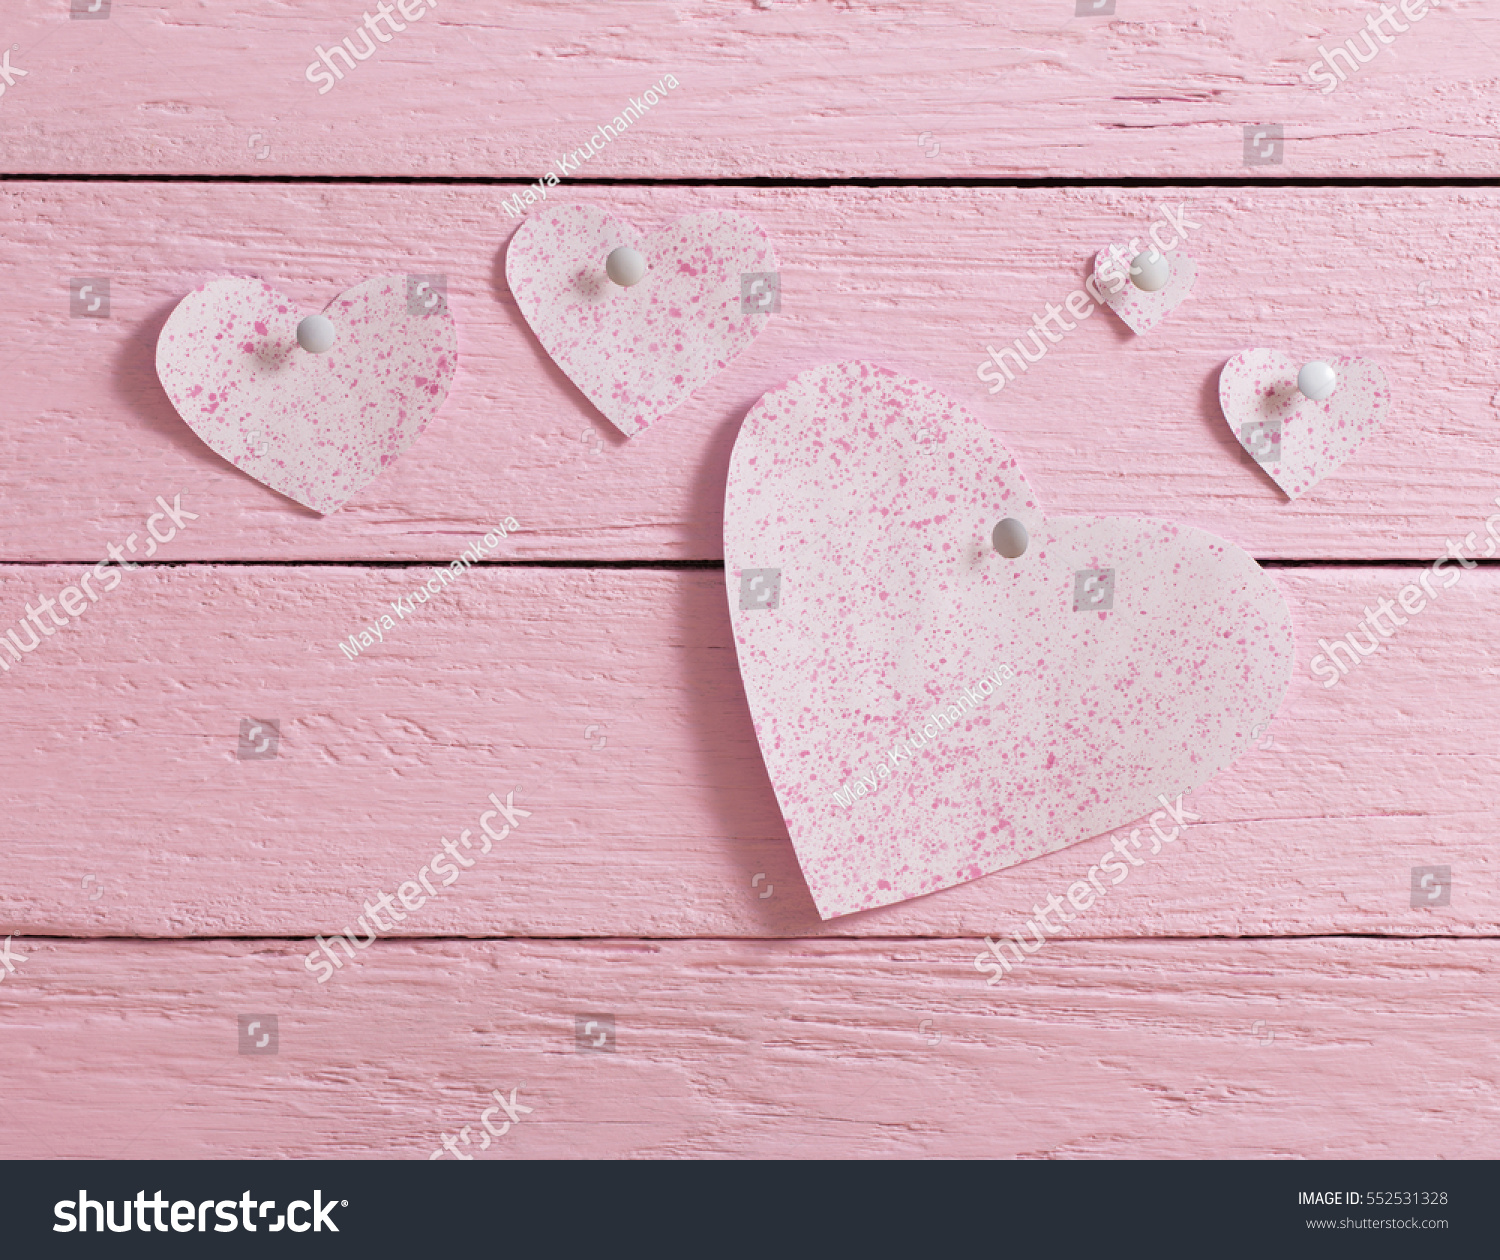 pink heart made of paper on wooden background #552531328